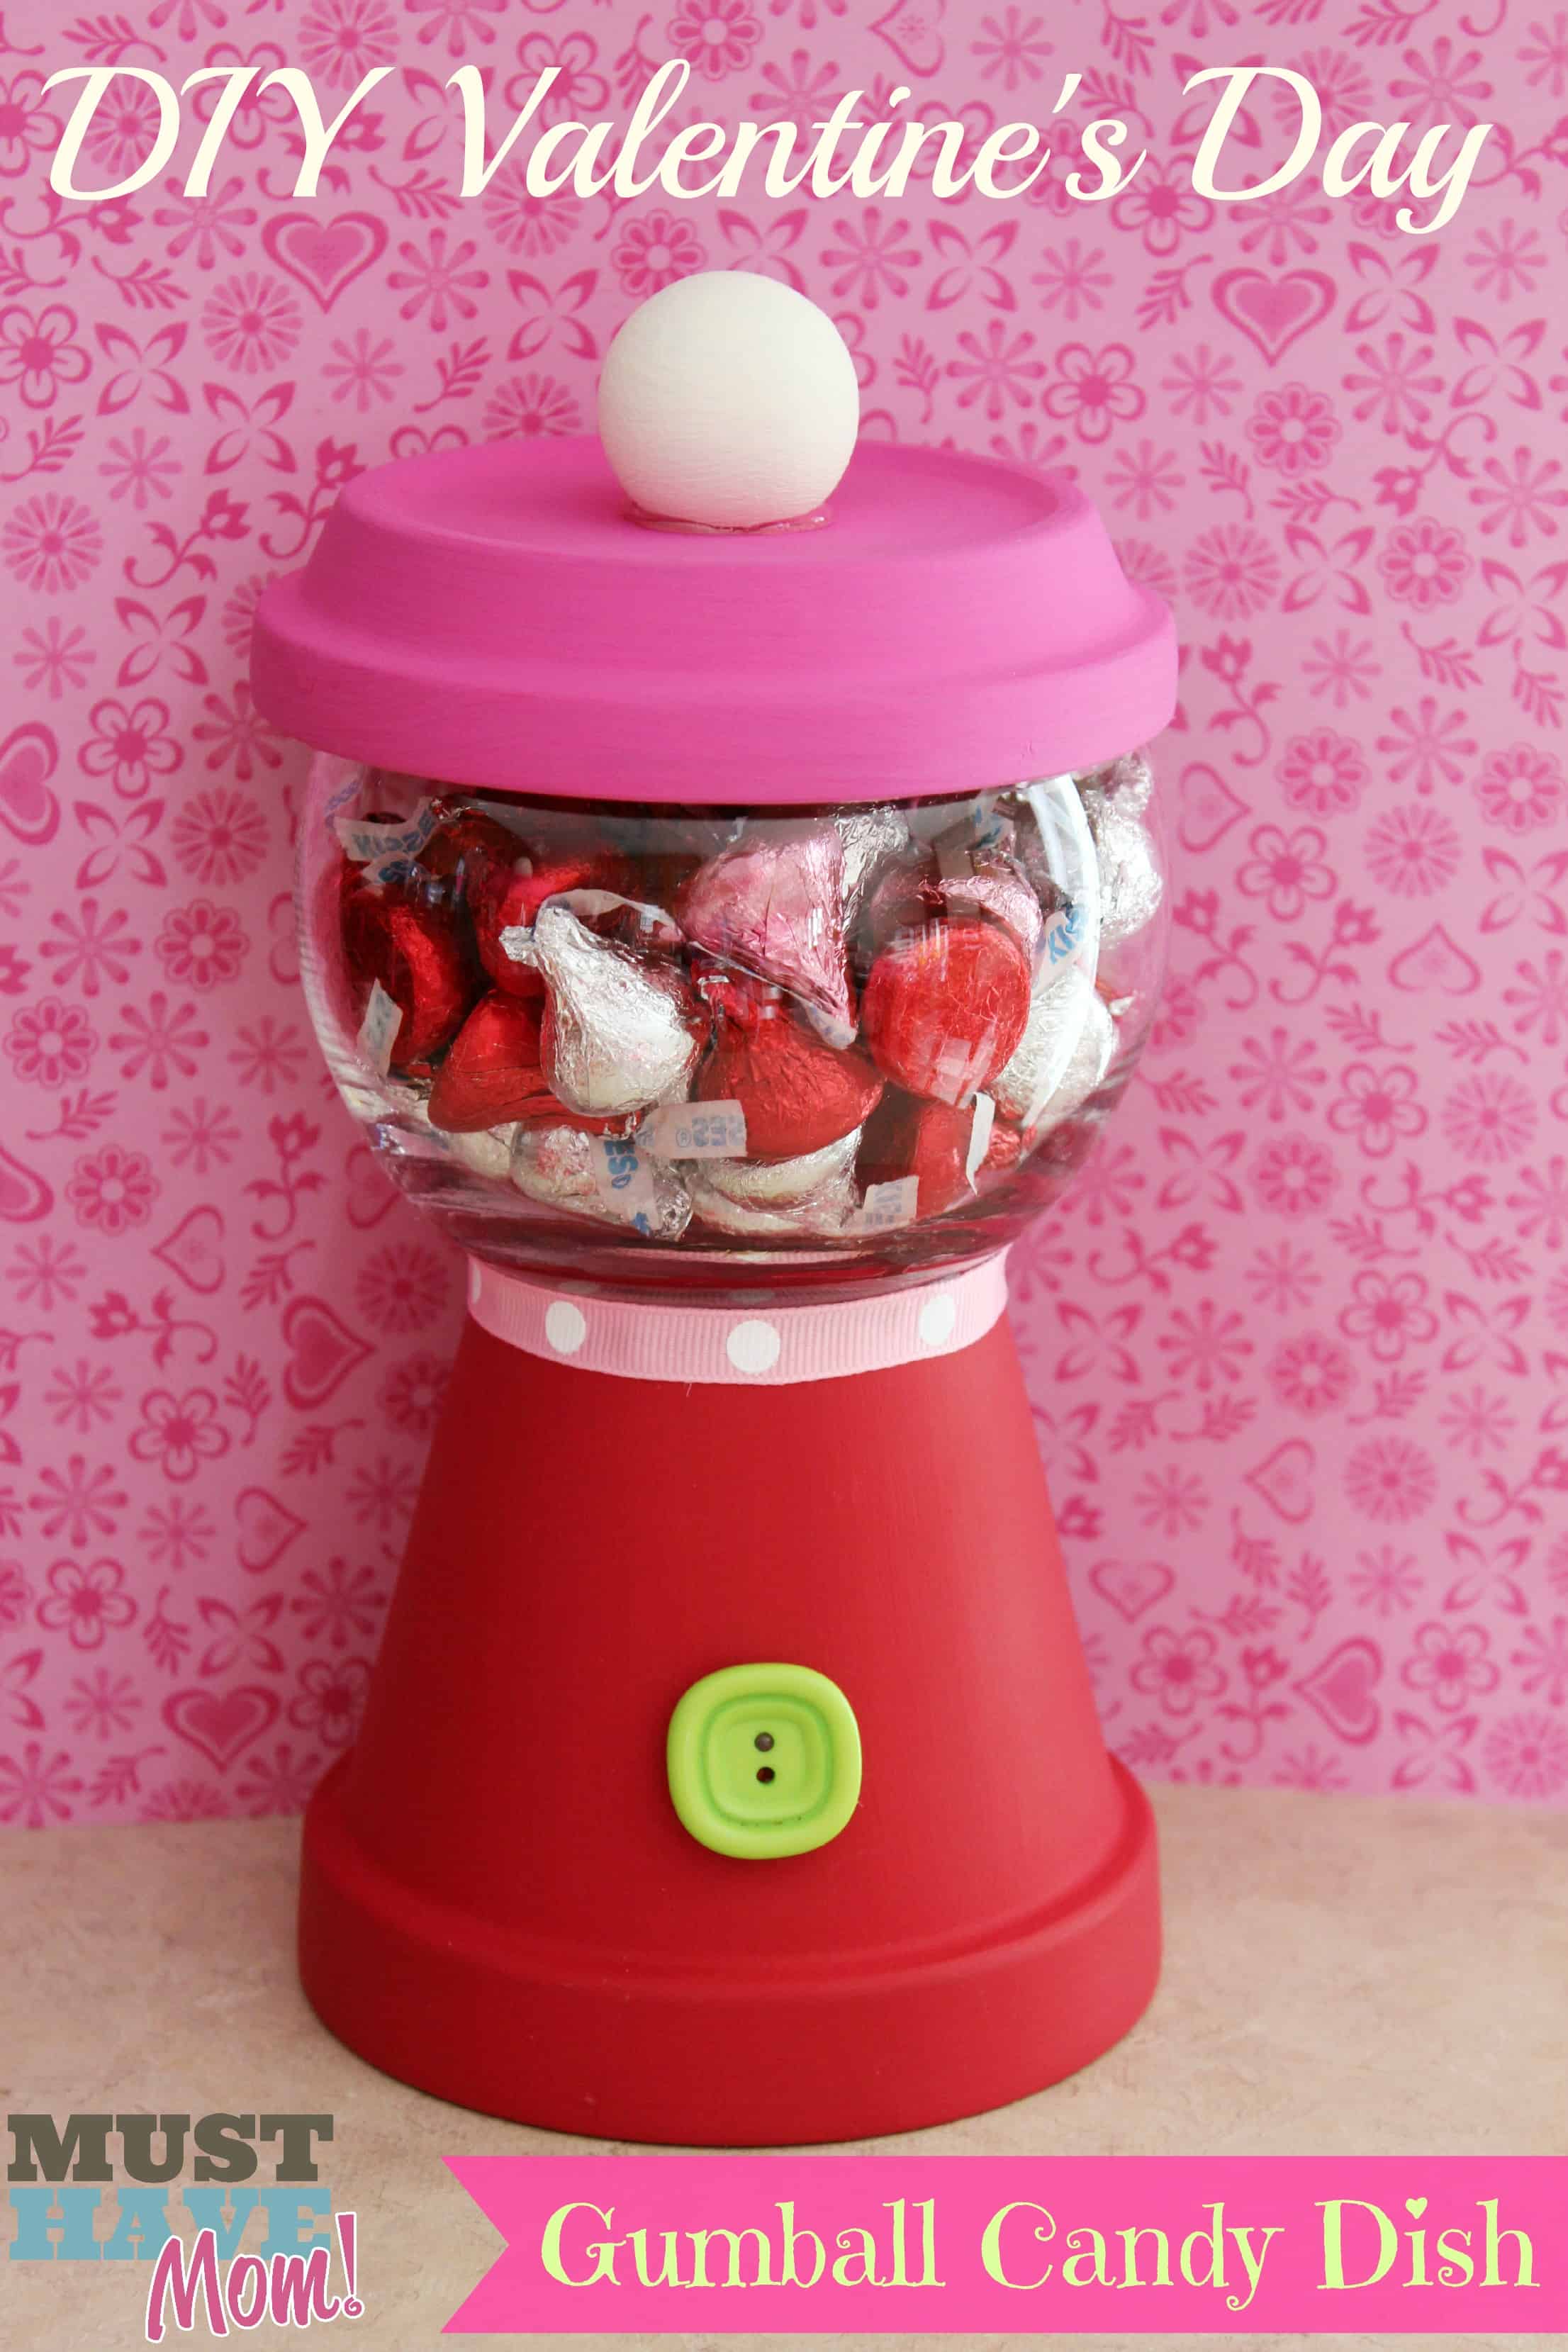 DIY Valentine's Day Gumball Dish from Must Have Mom